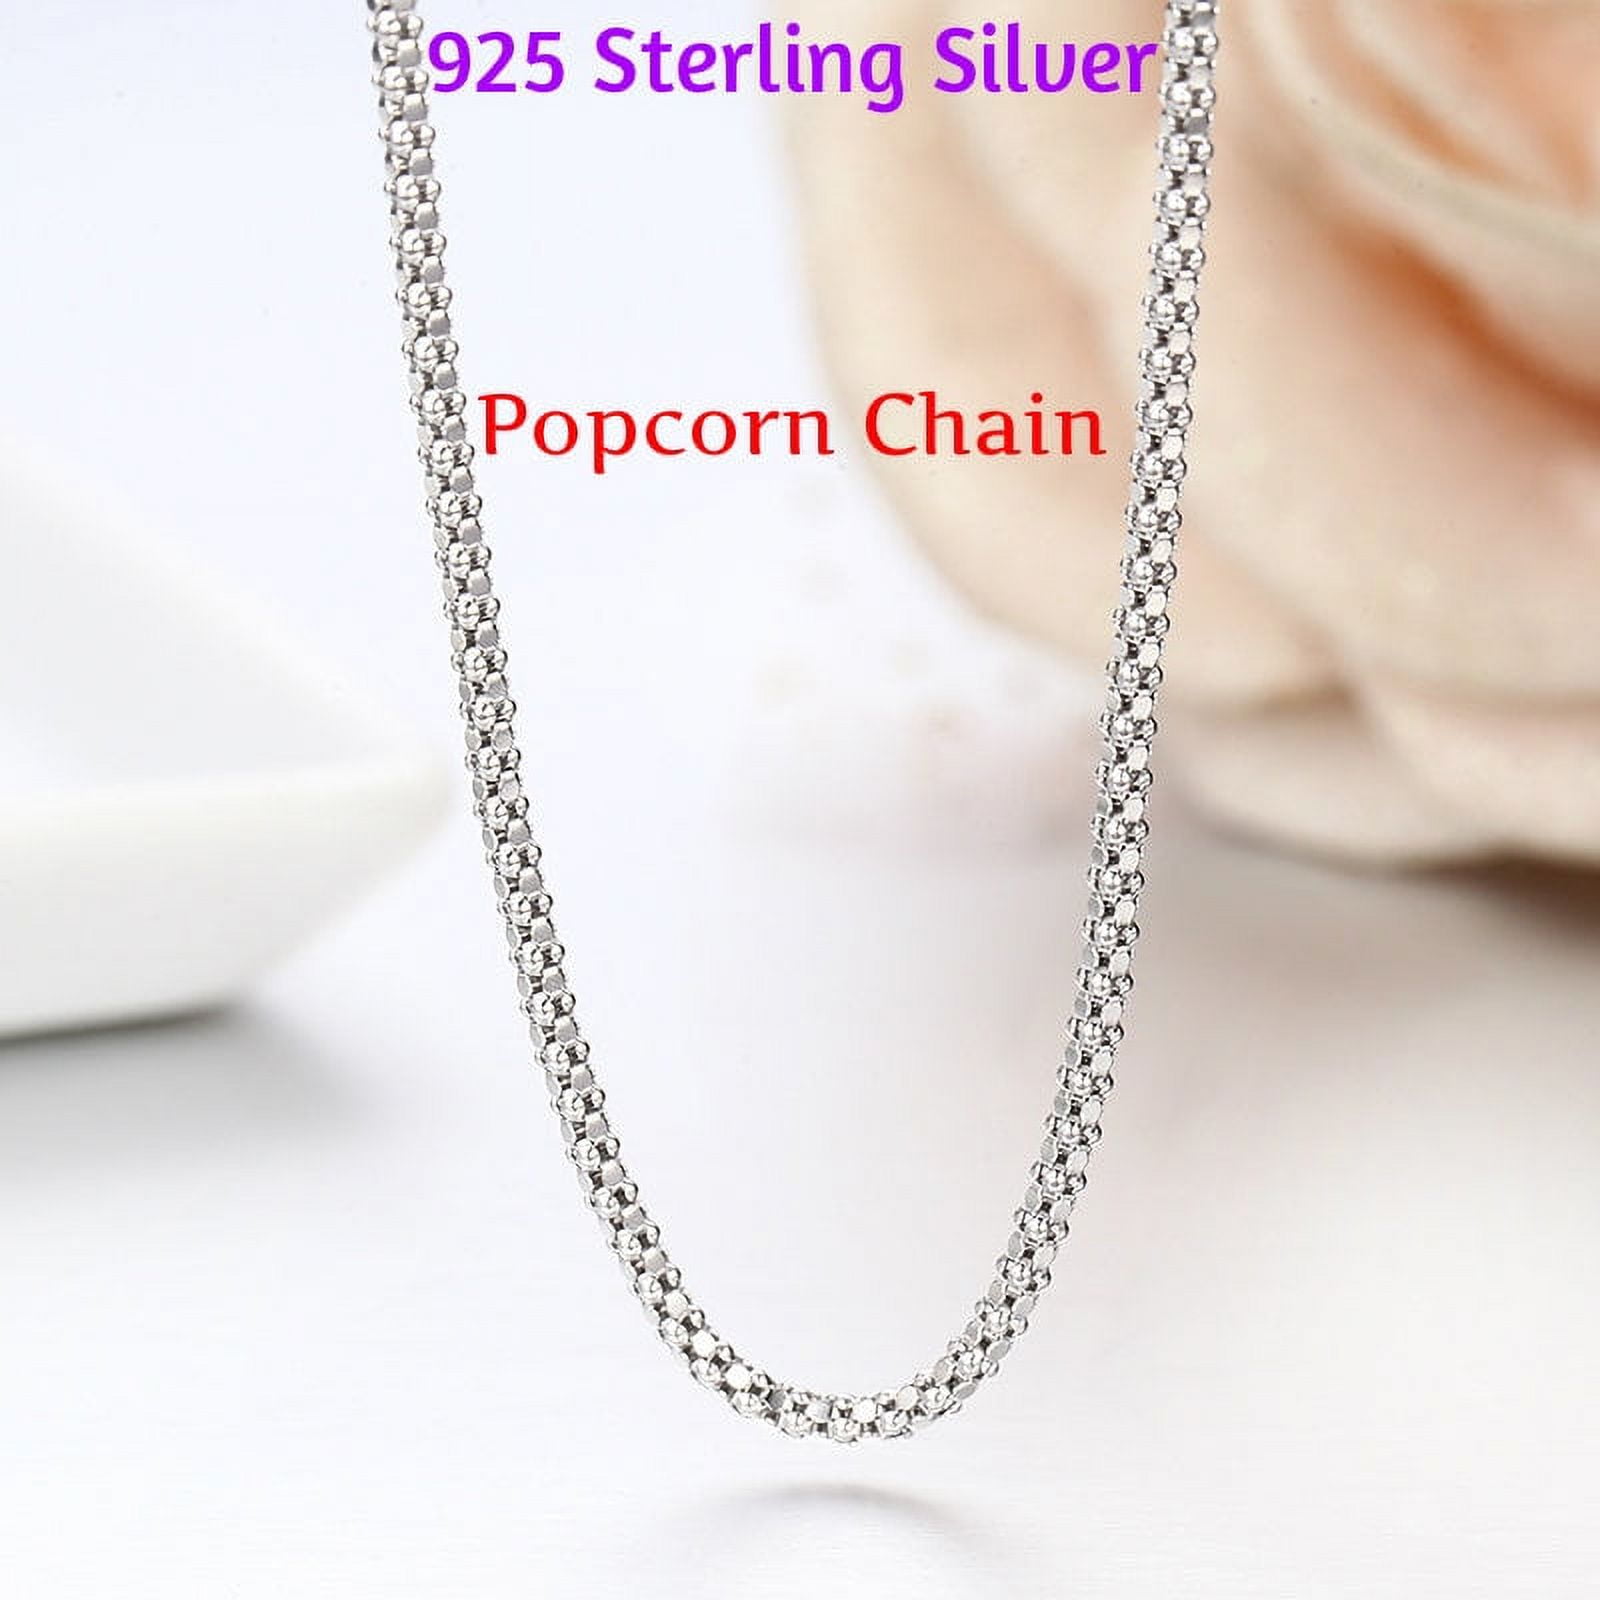 Sterling Silver Chain, Popcorn Italian Made Chain 16 Inches / (B) Lever Clasp